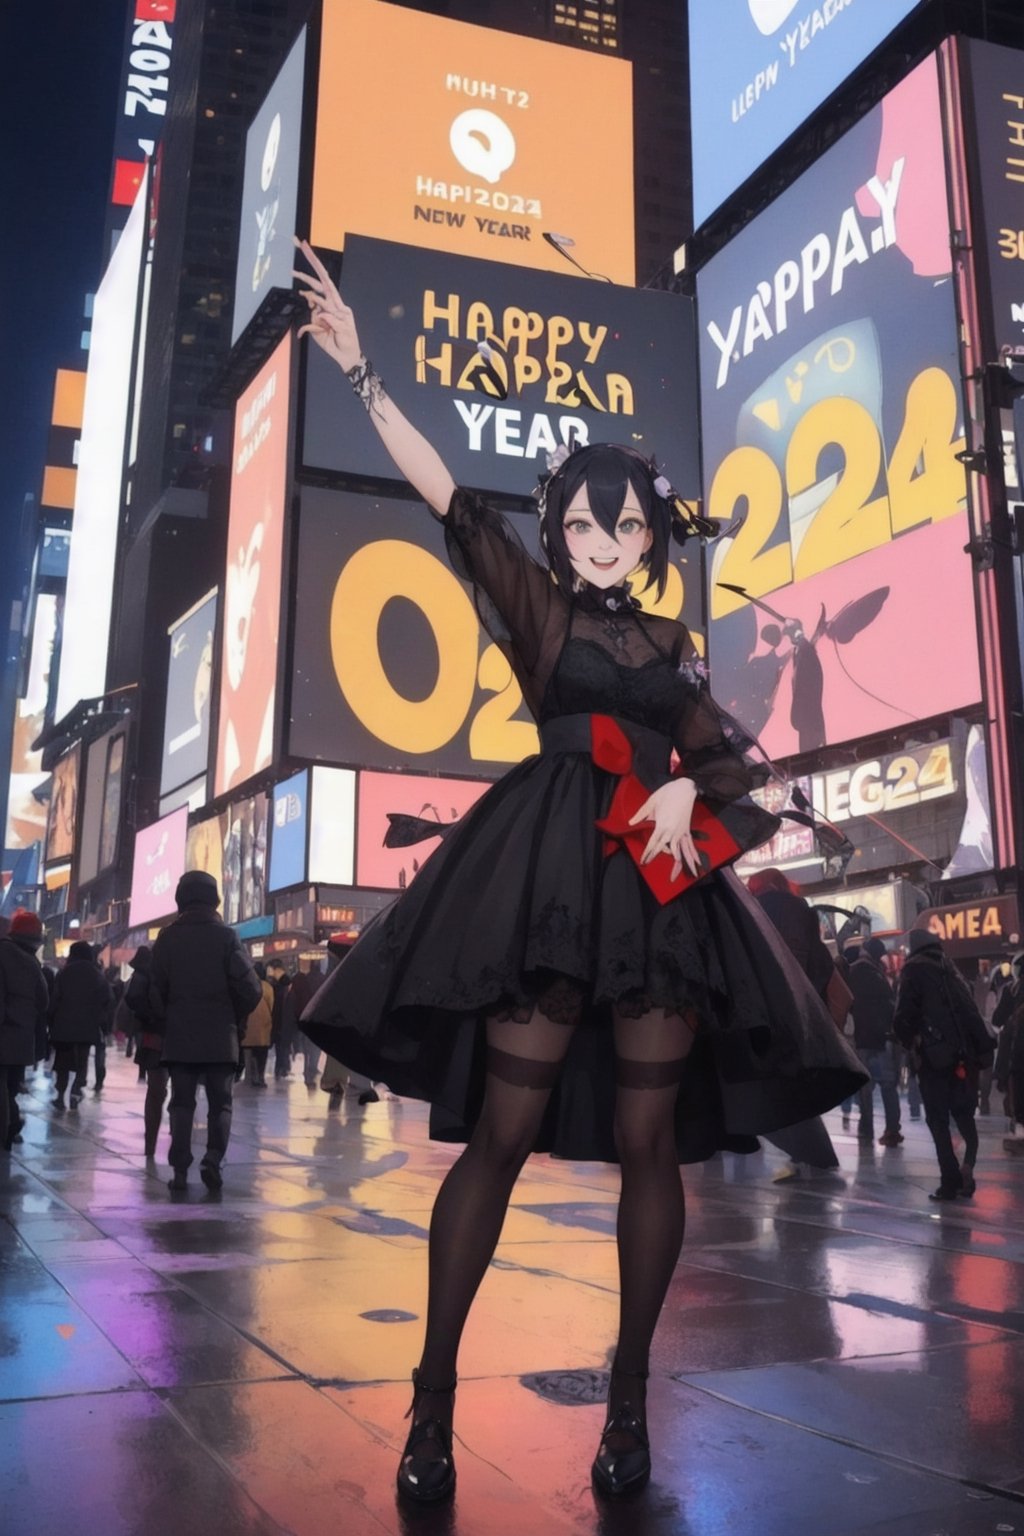 sole_female,Korean goth,
NYC Times Square,midnight,
New Year's Ball Drop,
ultrarealistic,5_fingered,BREAK
(holding a legible and perfectly typed ("HAPPY NEW YEAR 2024") large sign)